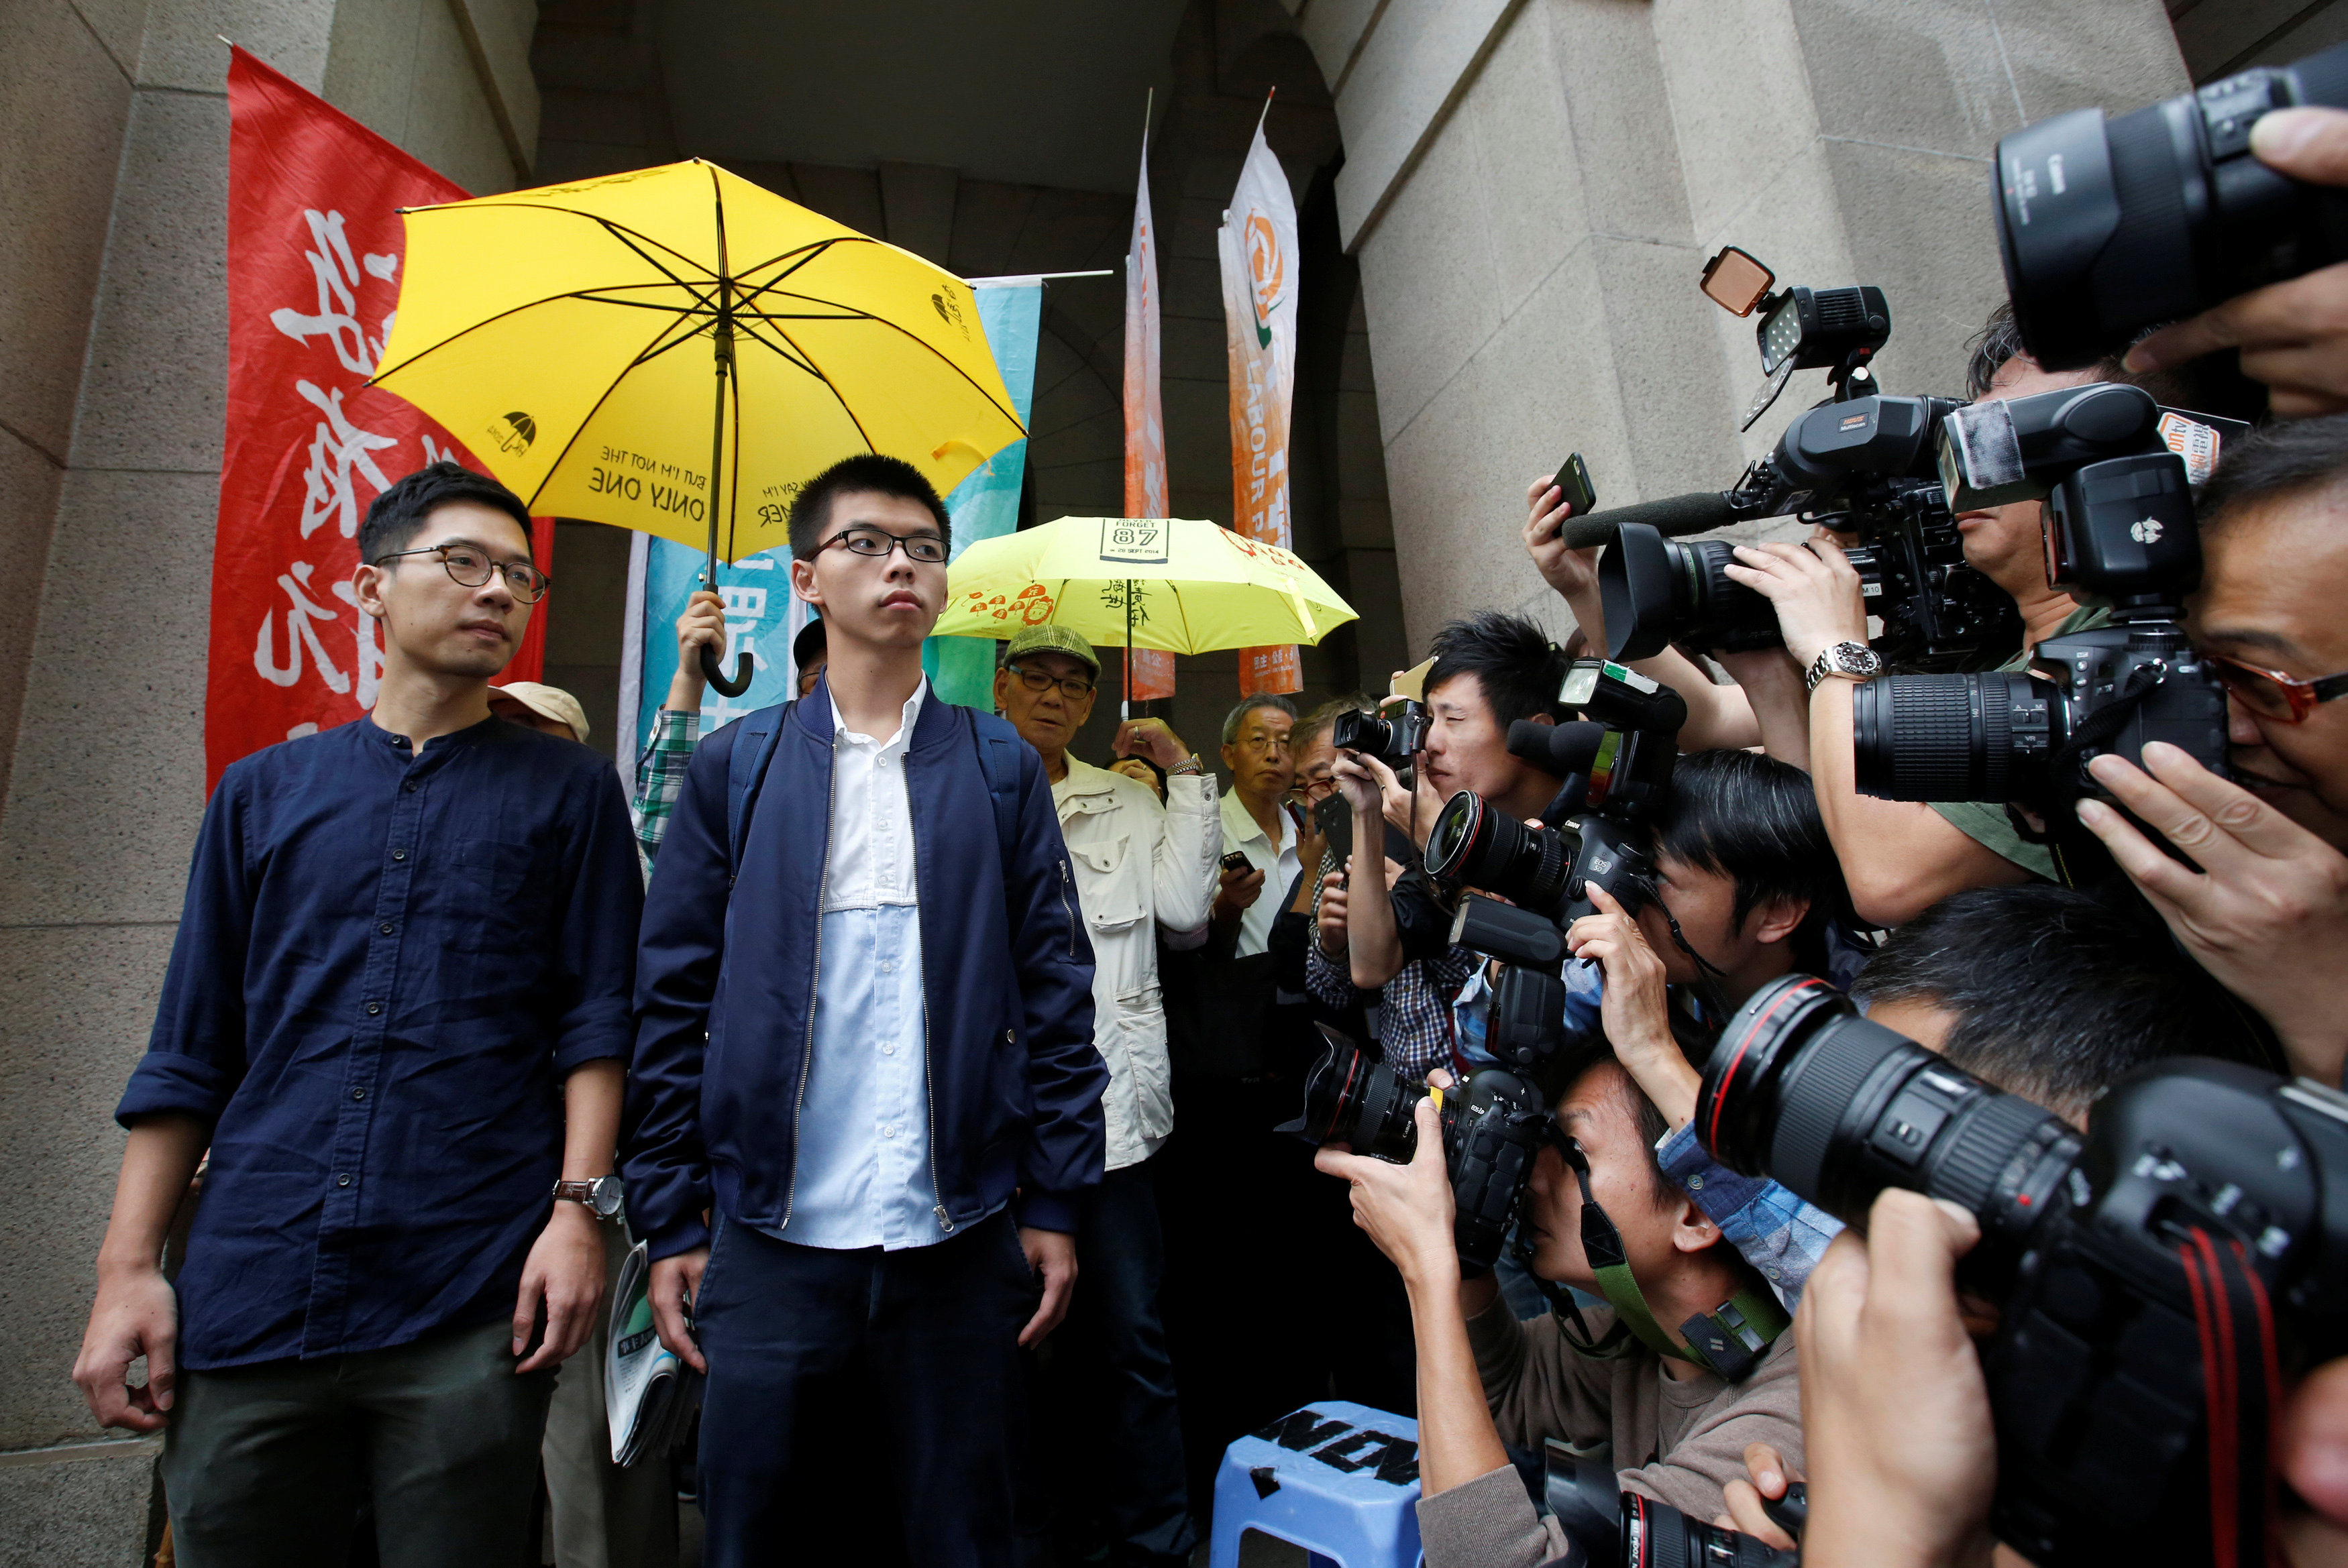 Jailed Hong Kong democracy activists win final chance to appeal against their sentences